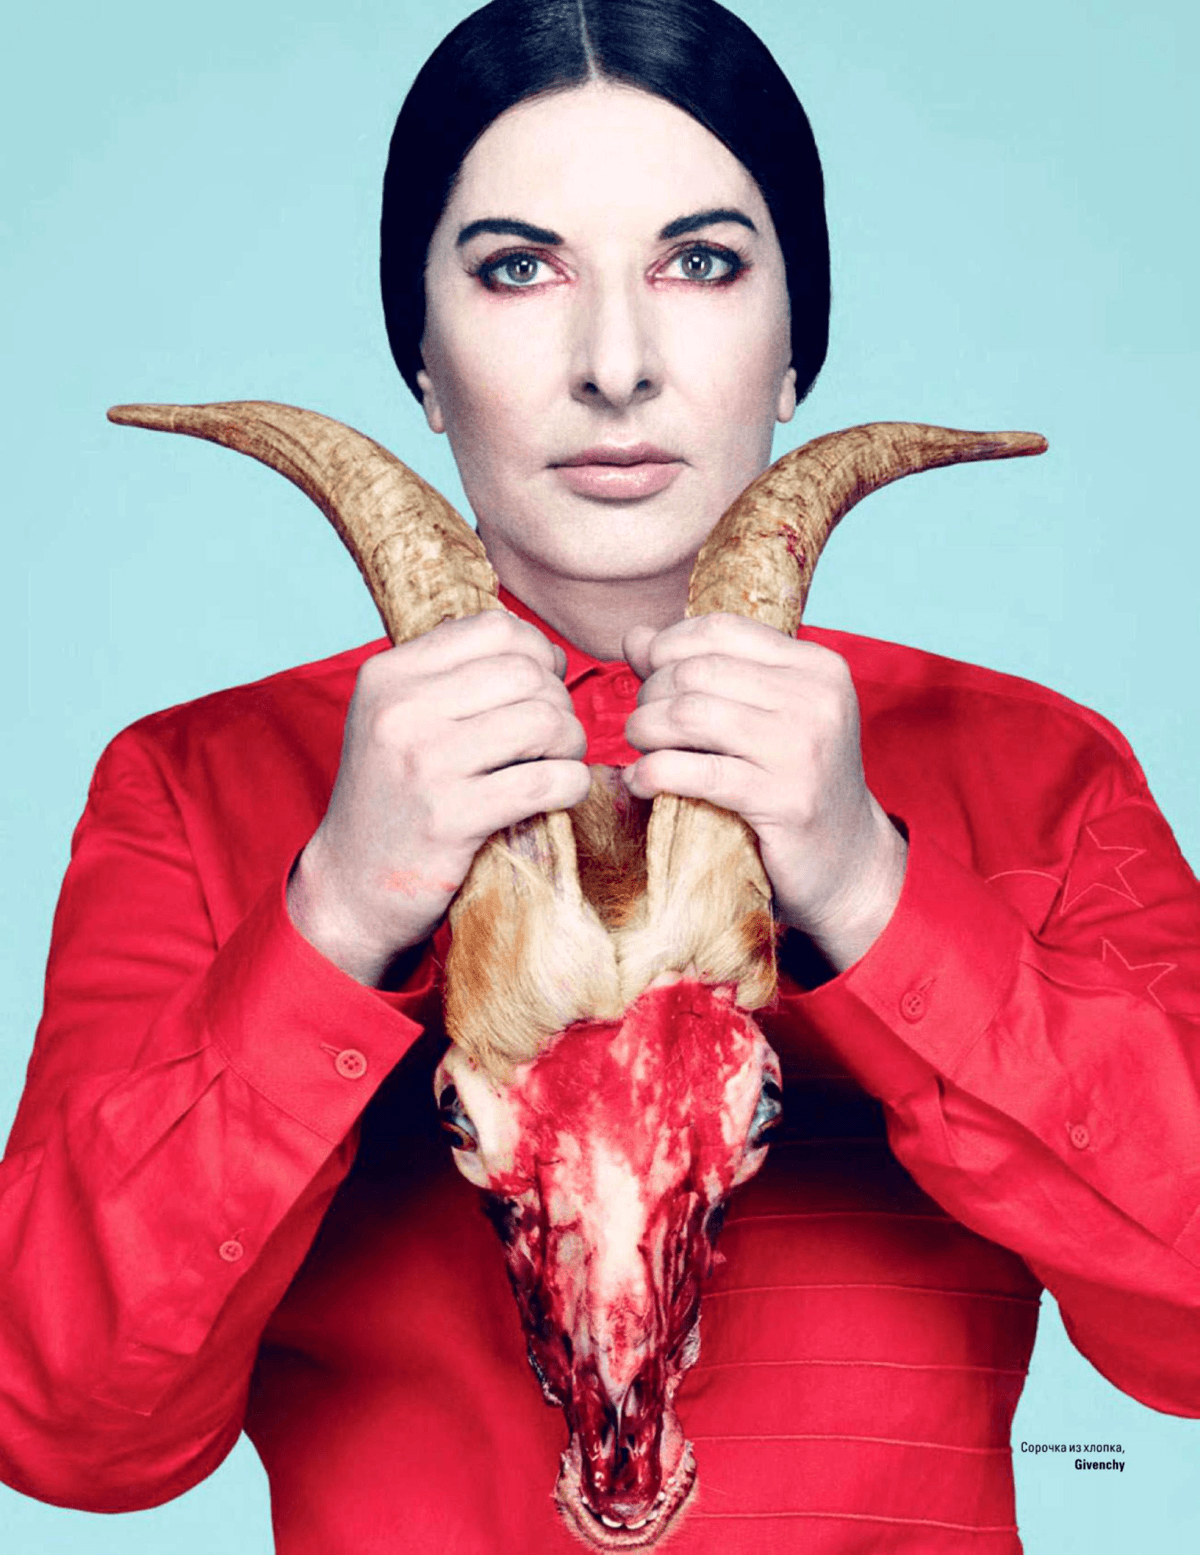 Holding the skinned head of a dead goat, a clear reference to the occult character Baphomet